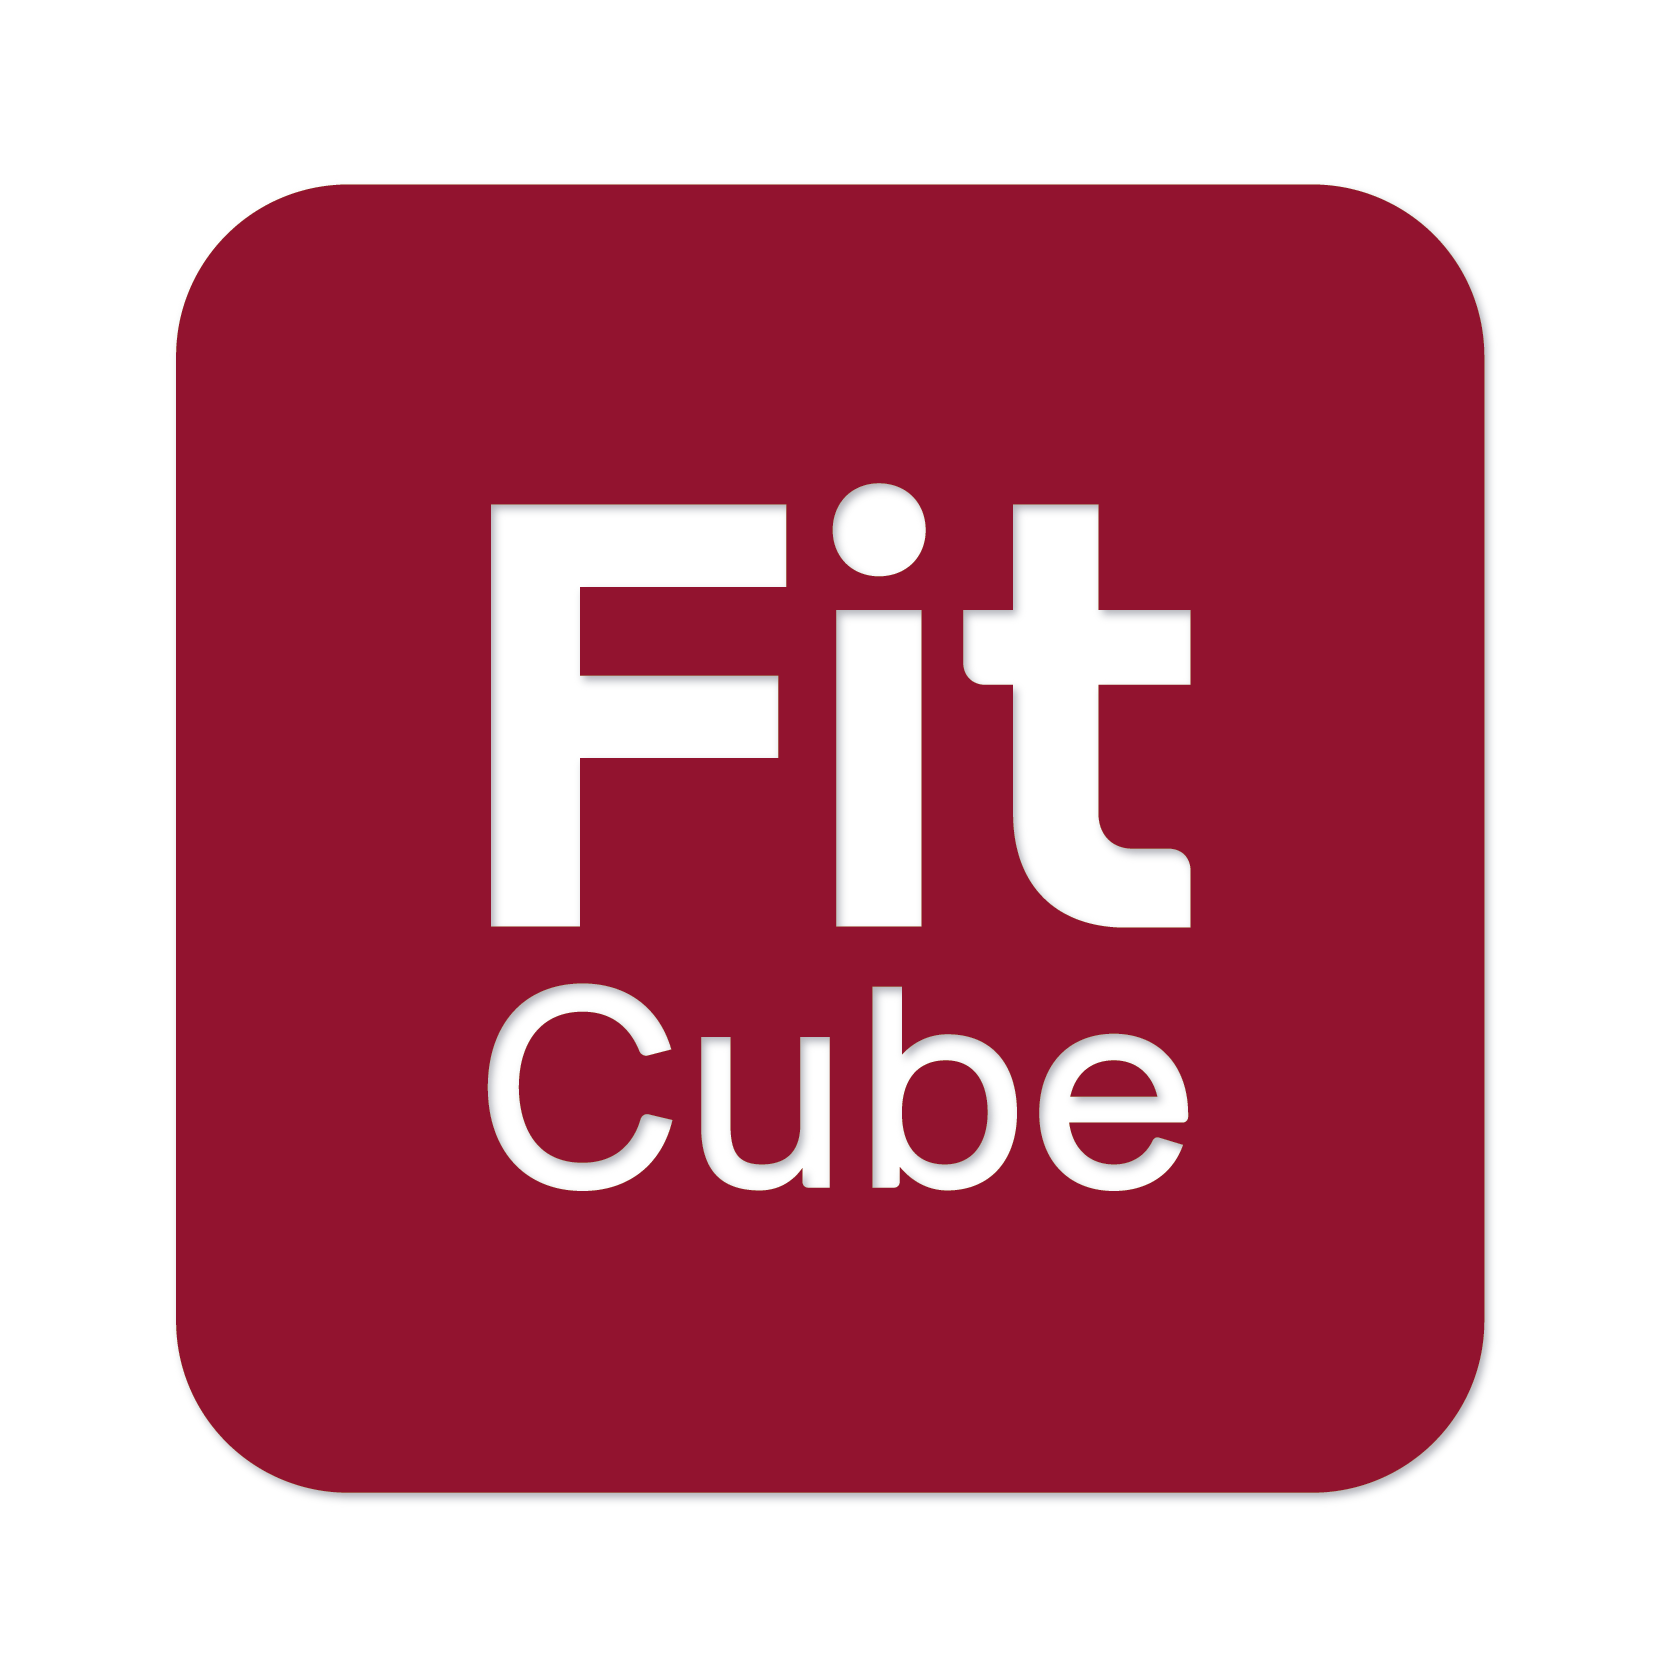 MECOS BOARDS Partner FitCube